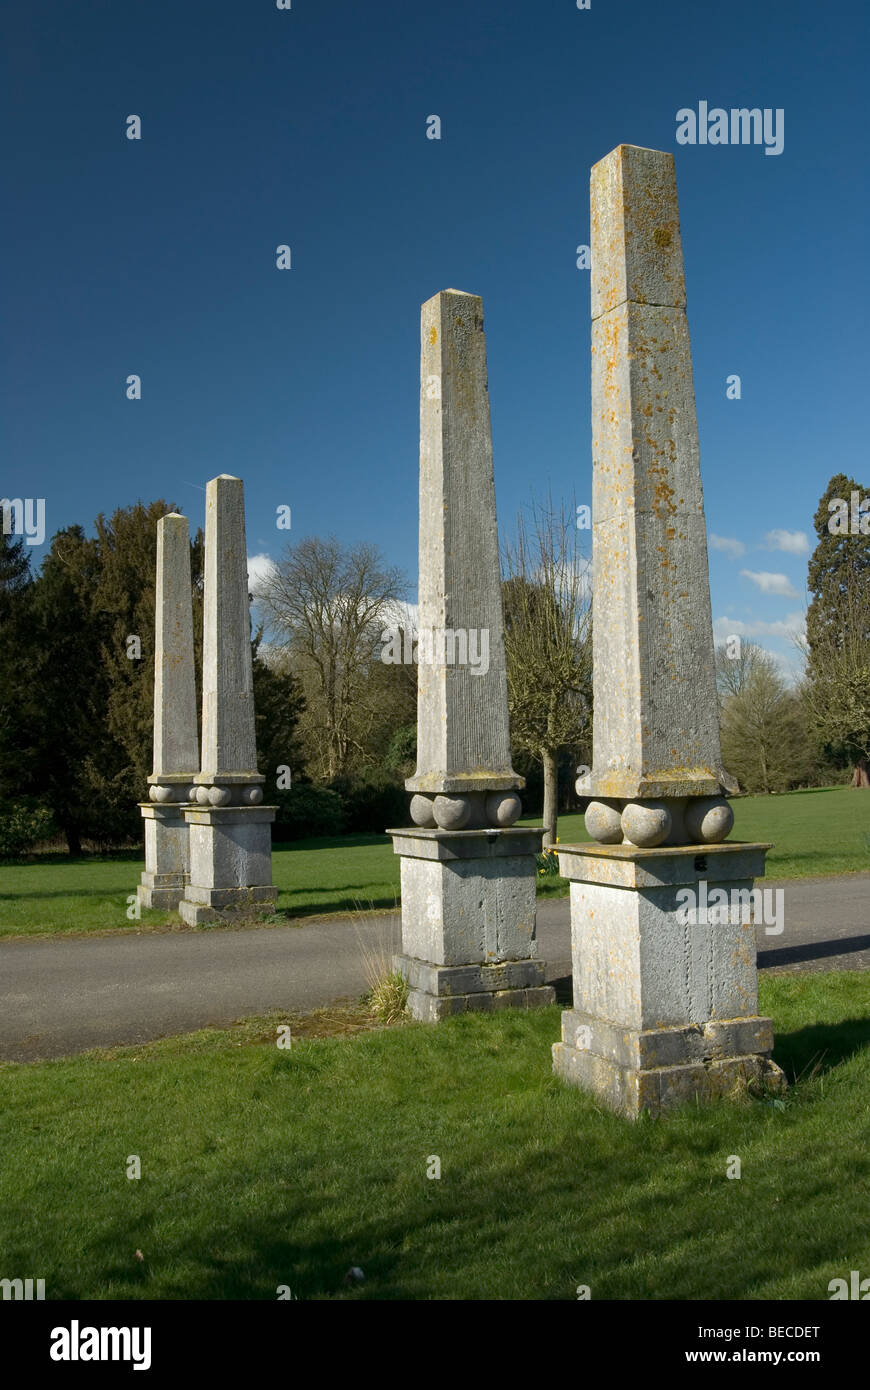 Four square columns in a row in parkland with blue sky on a fine day Stock Photo